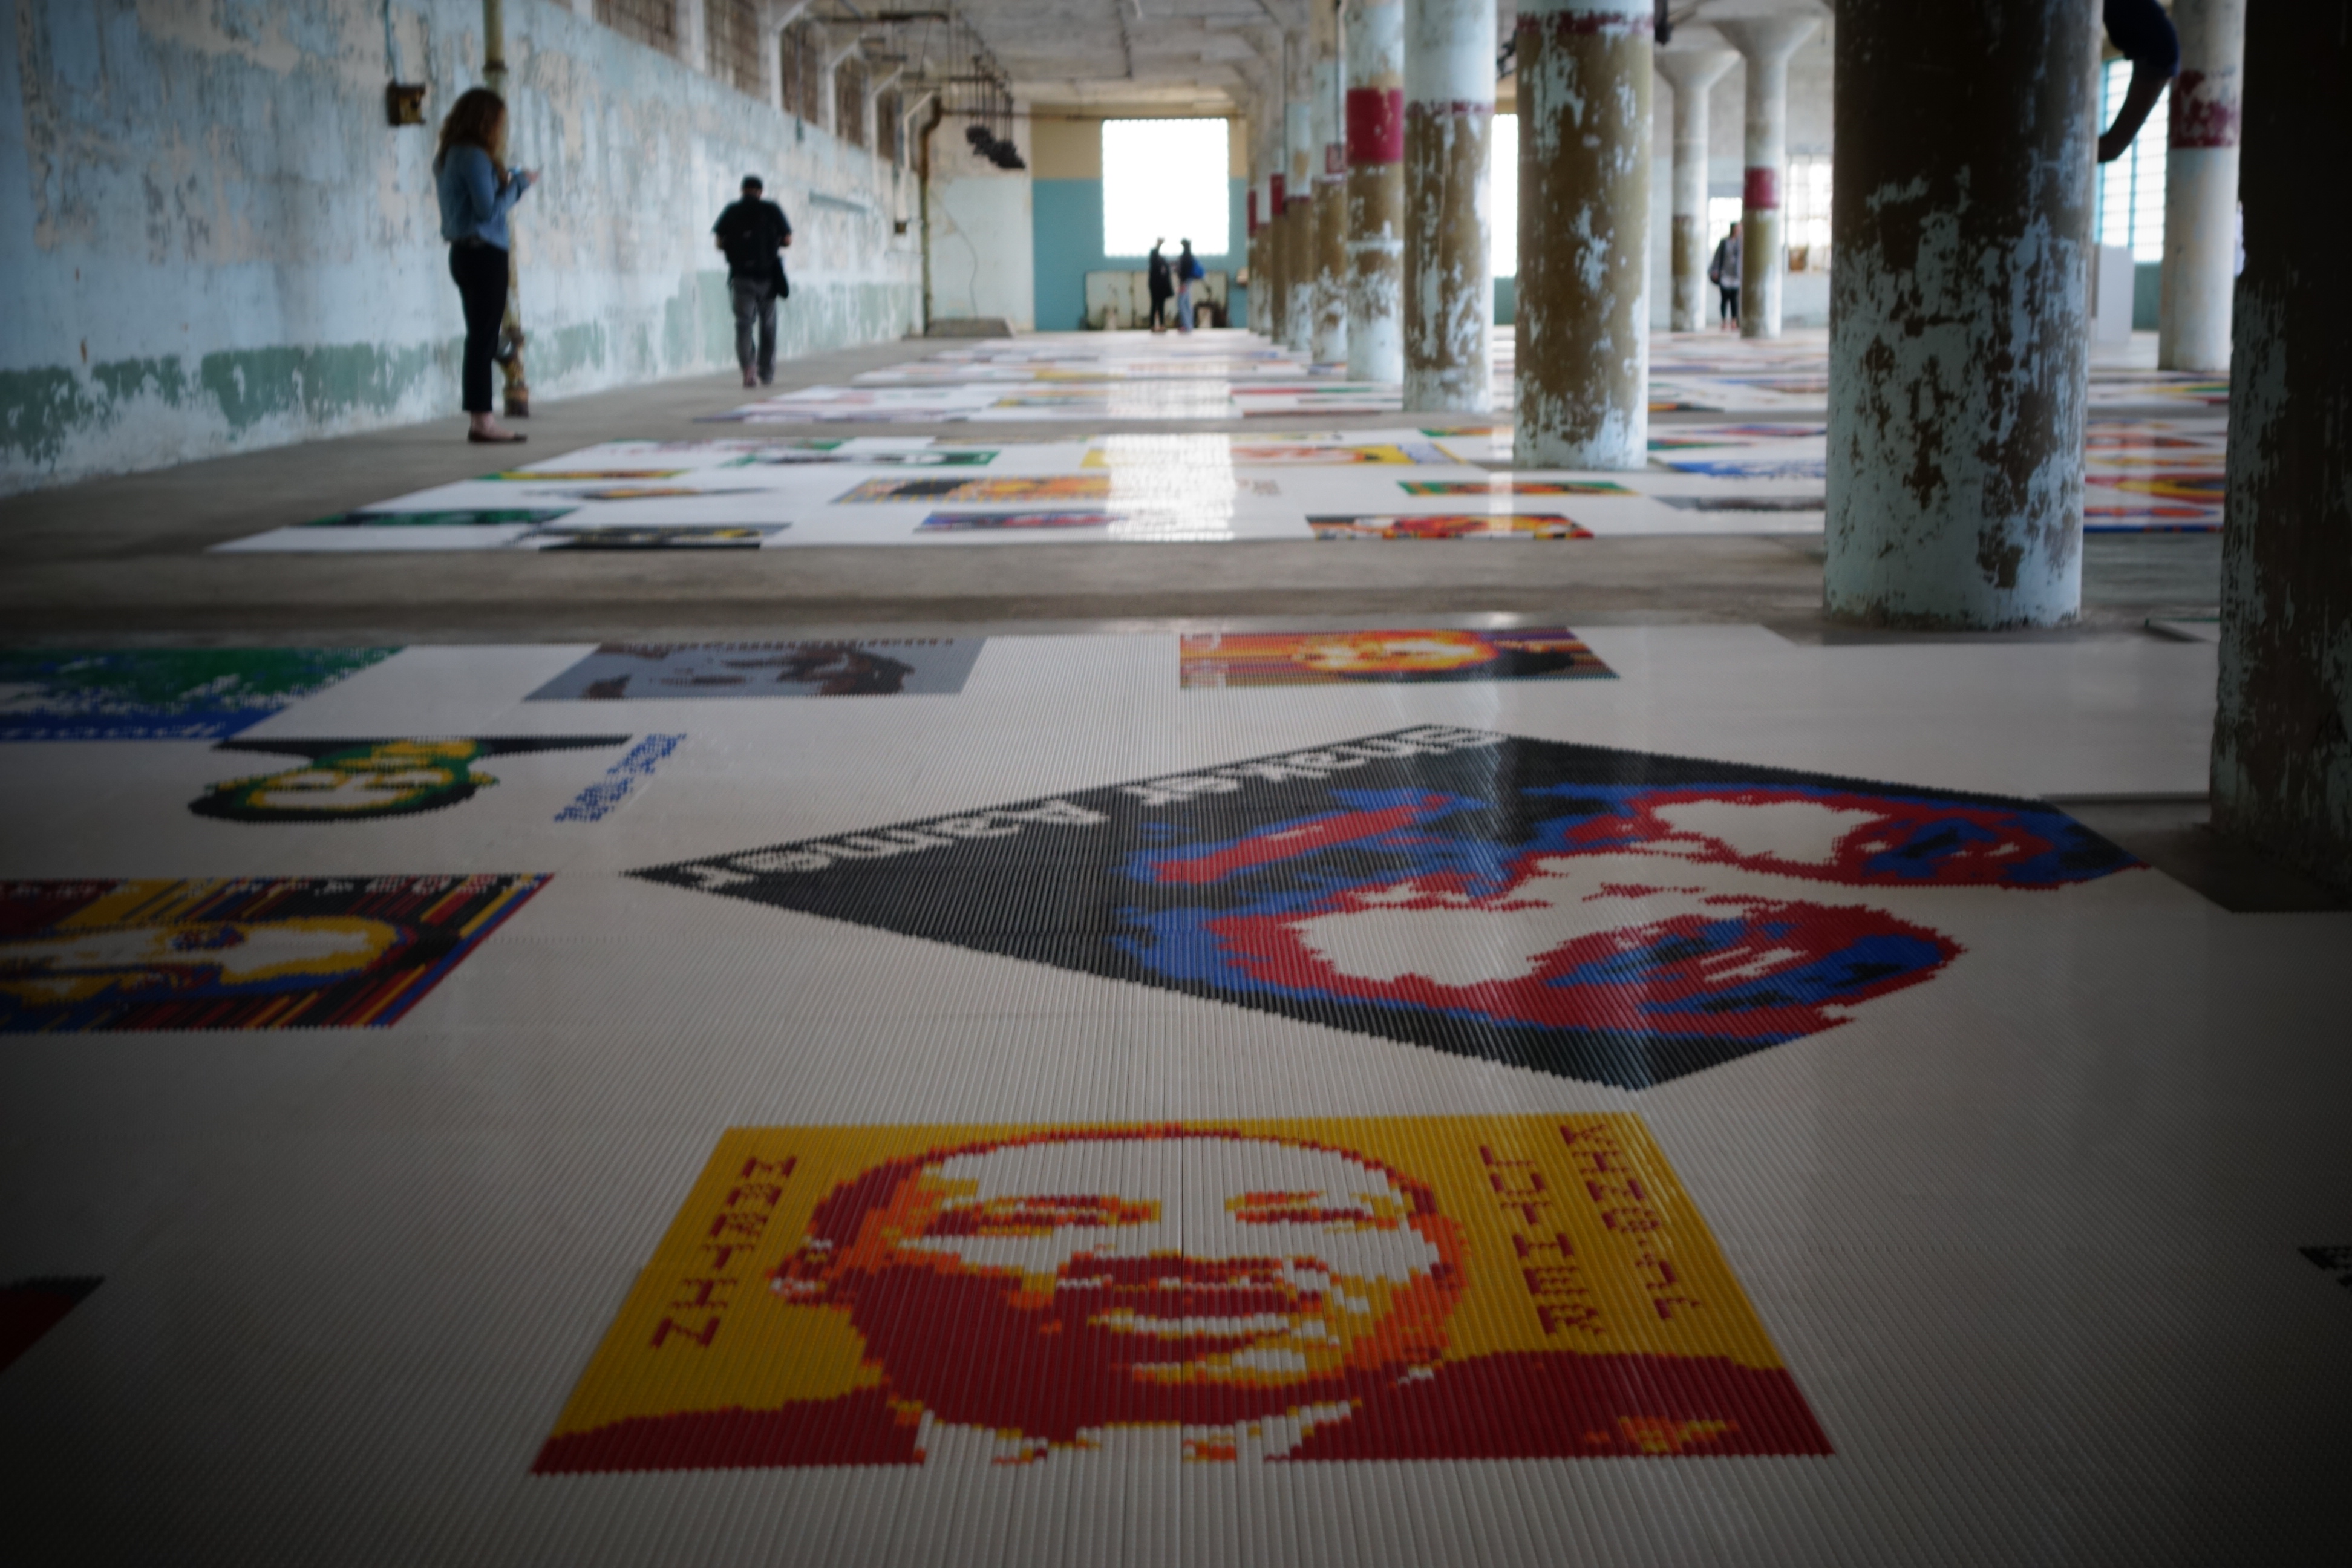 As part of his new exhibition, @Large, Chinese artist Ai Weiwei oversaw the construction of 176 Lego portraits of political prisoners, most still incarcerated as of June 2014. (Katy Steinmetz for TIME)